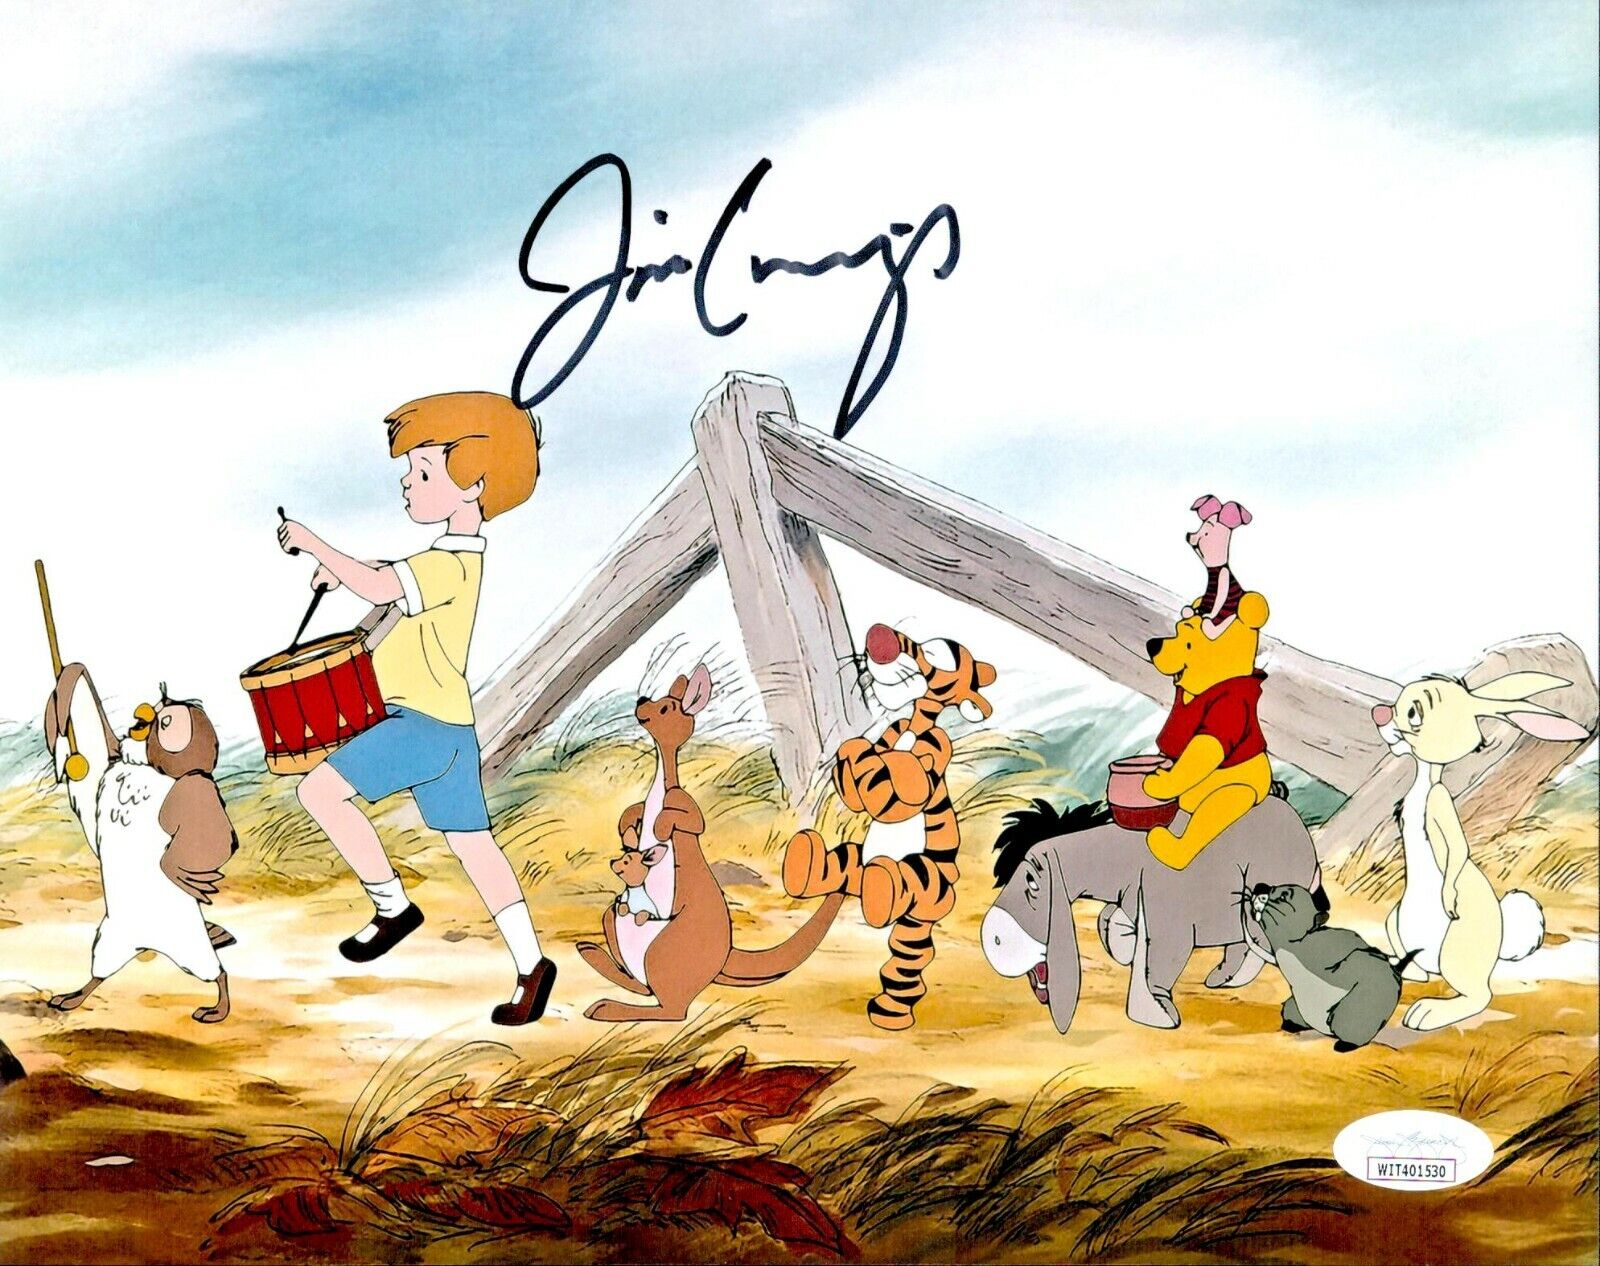 JIM CUMMINGS Signed 8x10 WINNIE THE POOH Photo Poster painting Authentic Autograph JSA COA